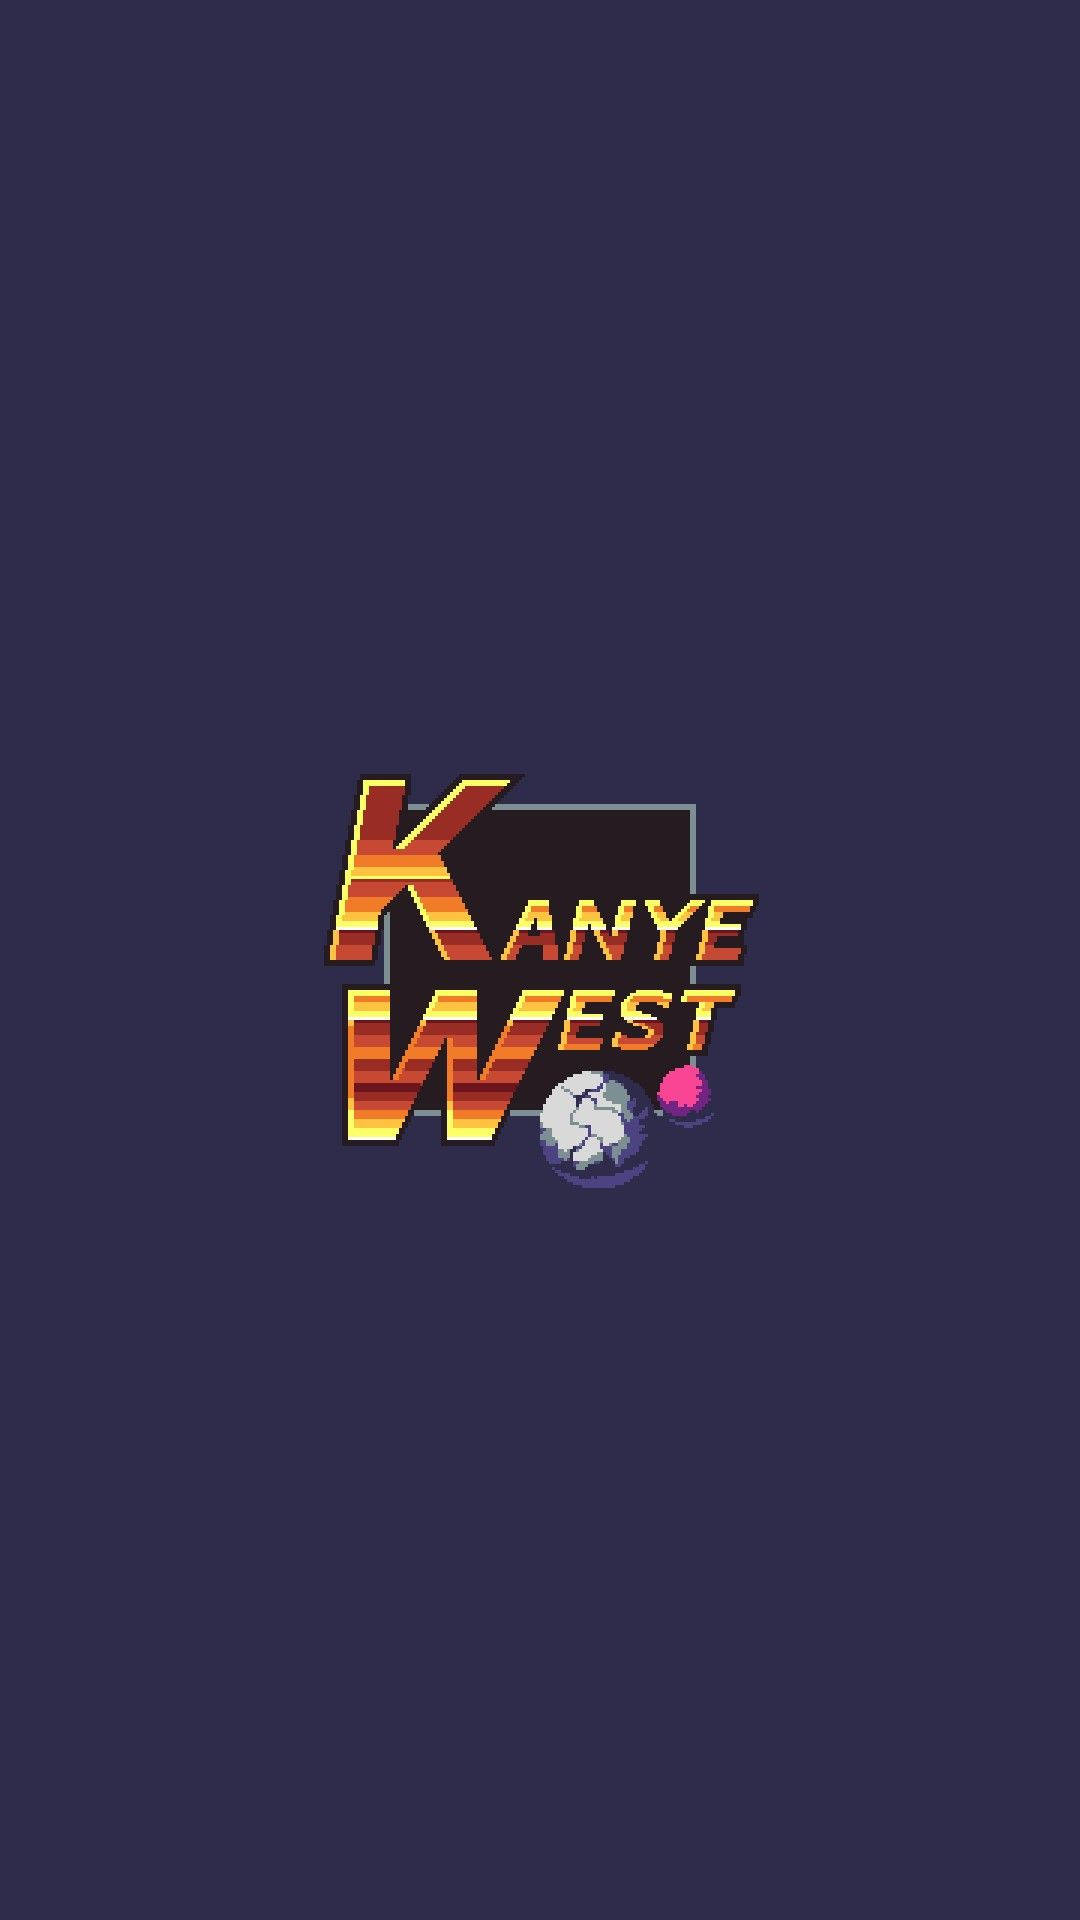 An Iconic Image Of Grammy-winning Recording Artist Kanye West Wallpaper